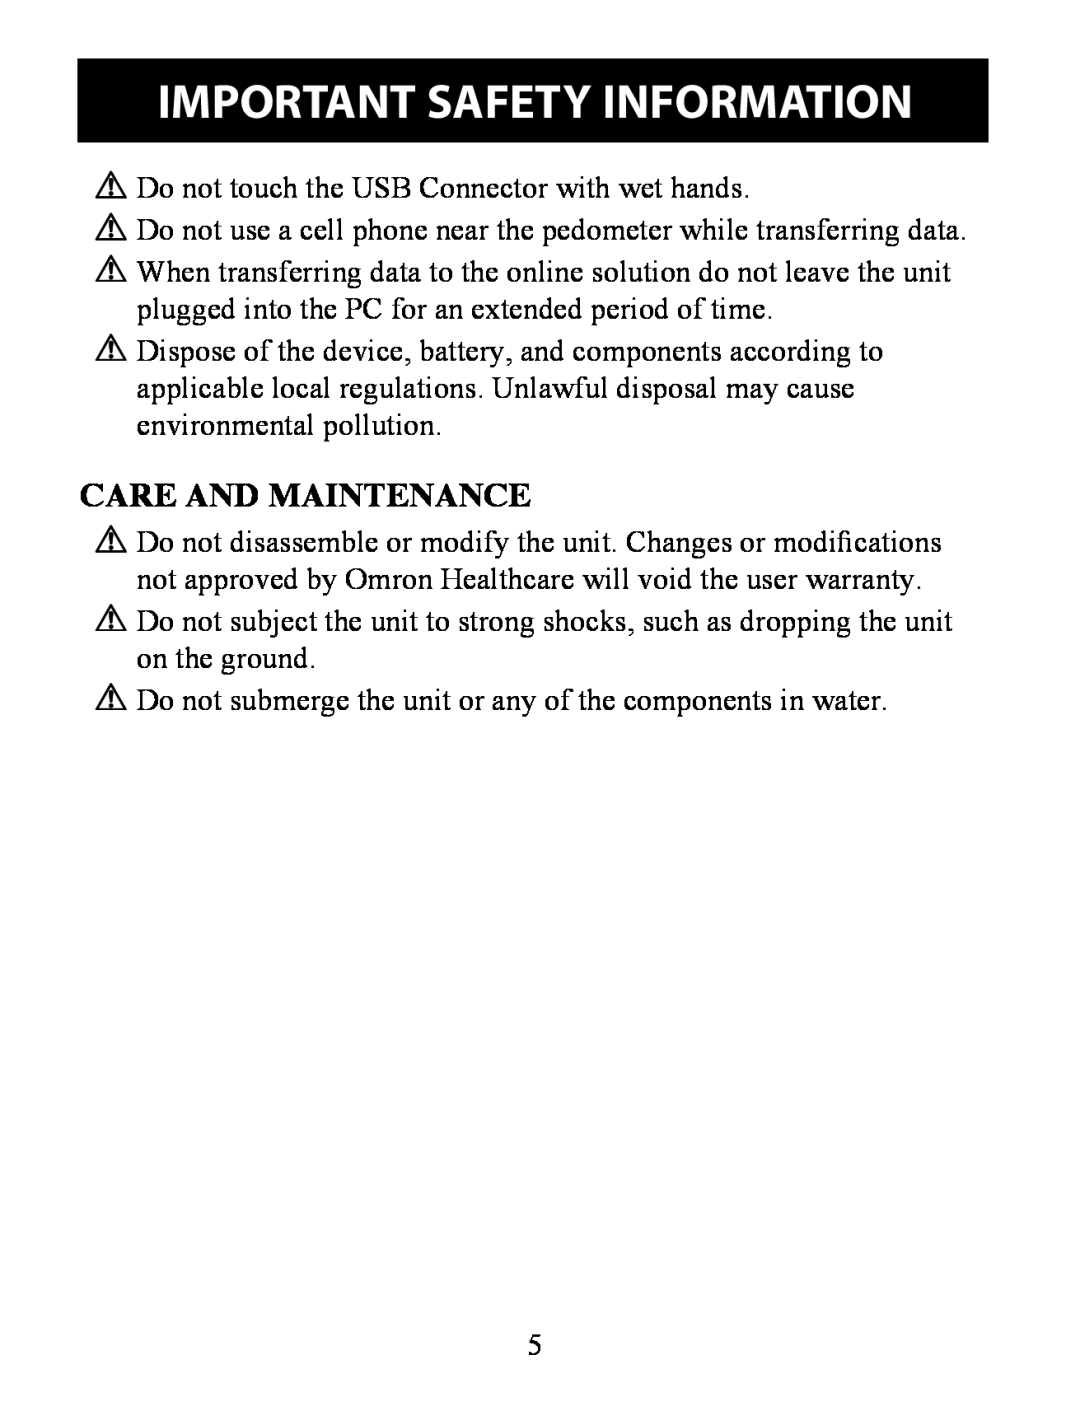 Omron HJ-324U instruction manual Care And Maintenance, Important Safety Information 